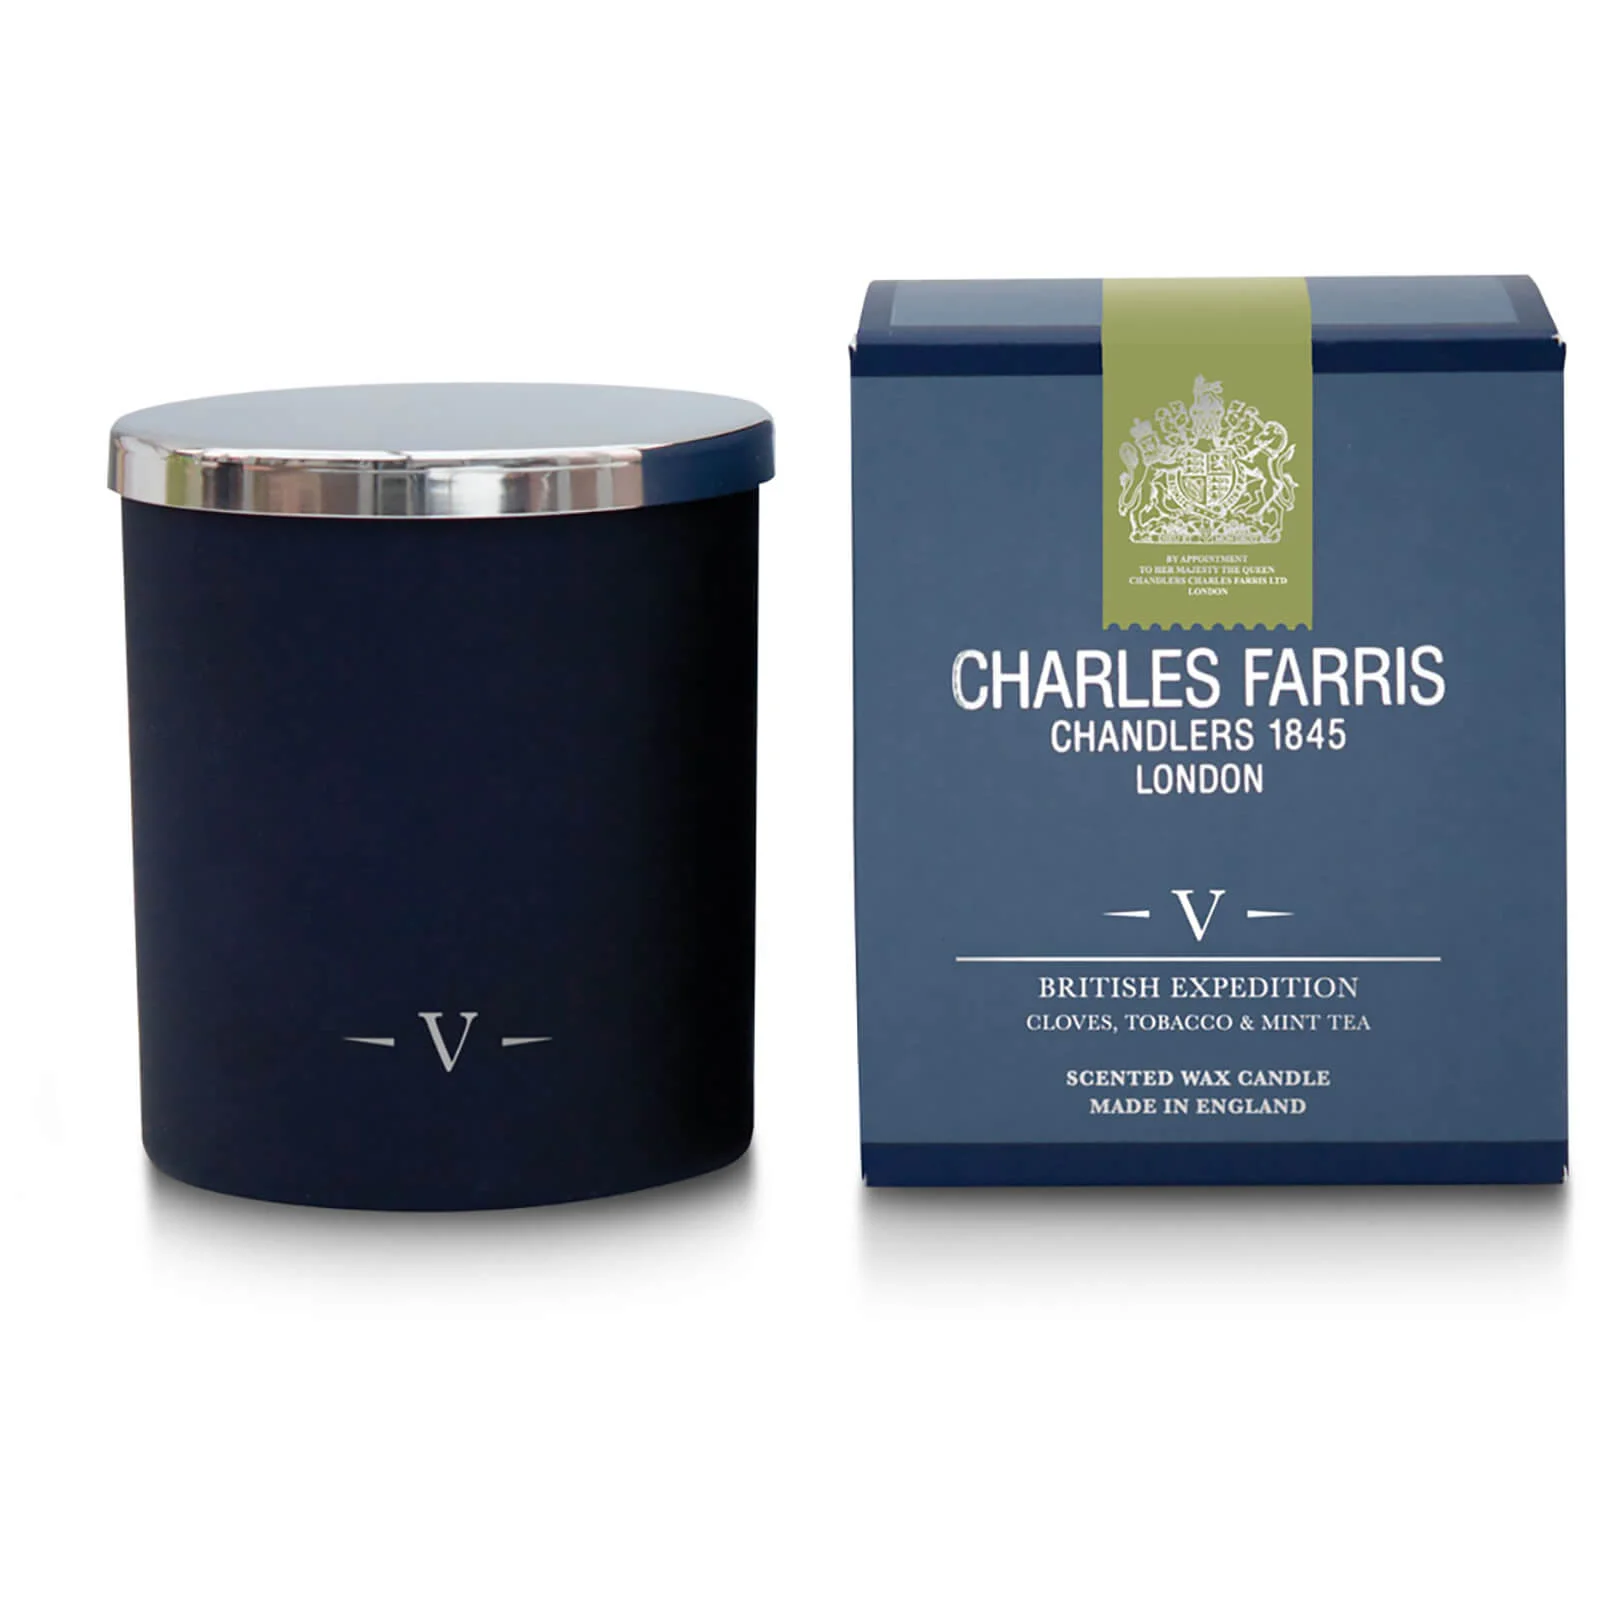 Charles Farris Signature British Expedition Candle 210g Image 1